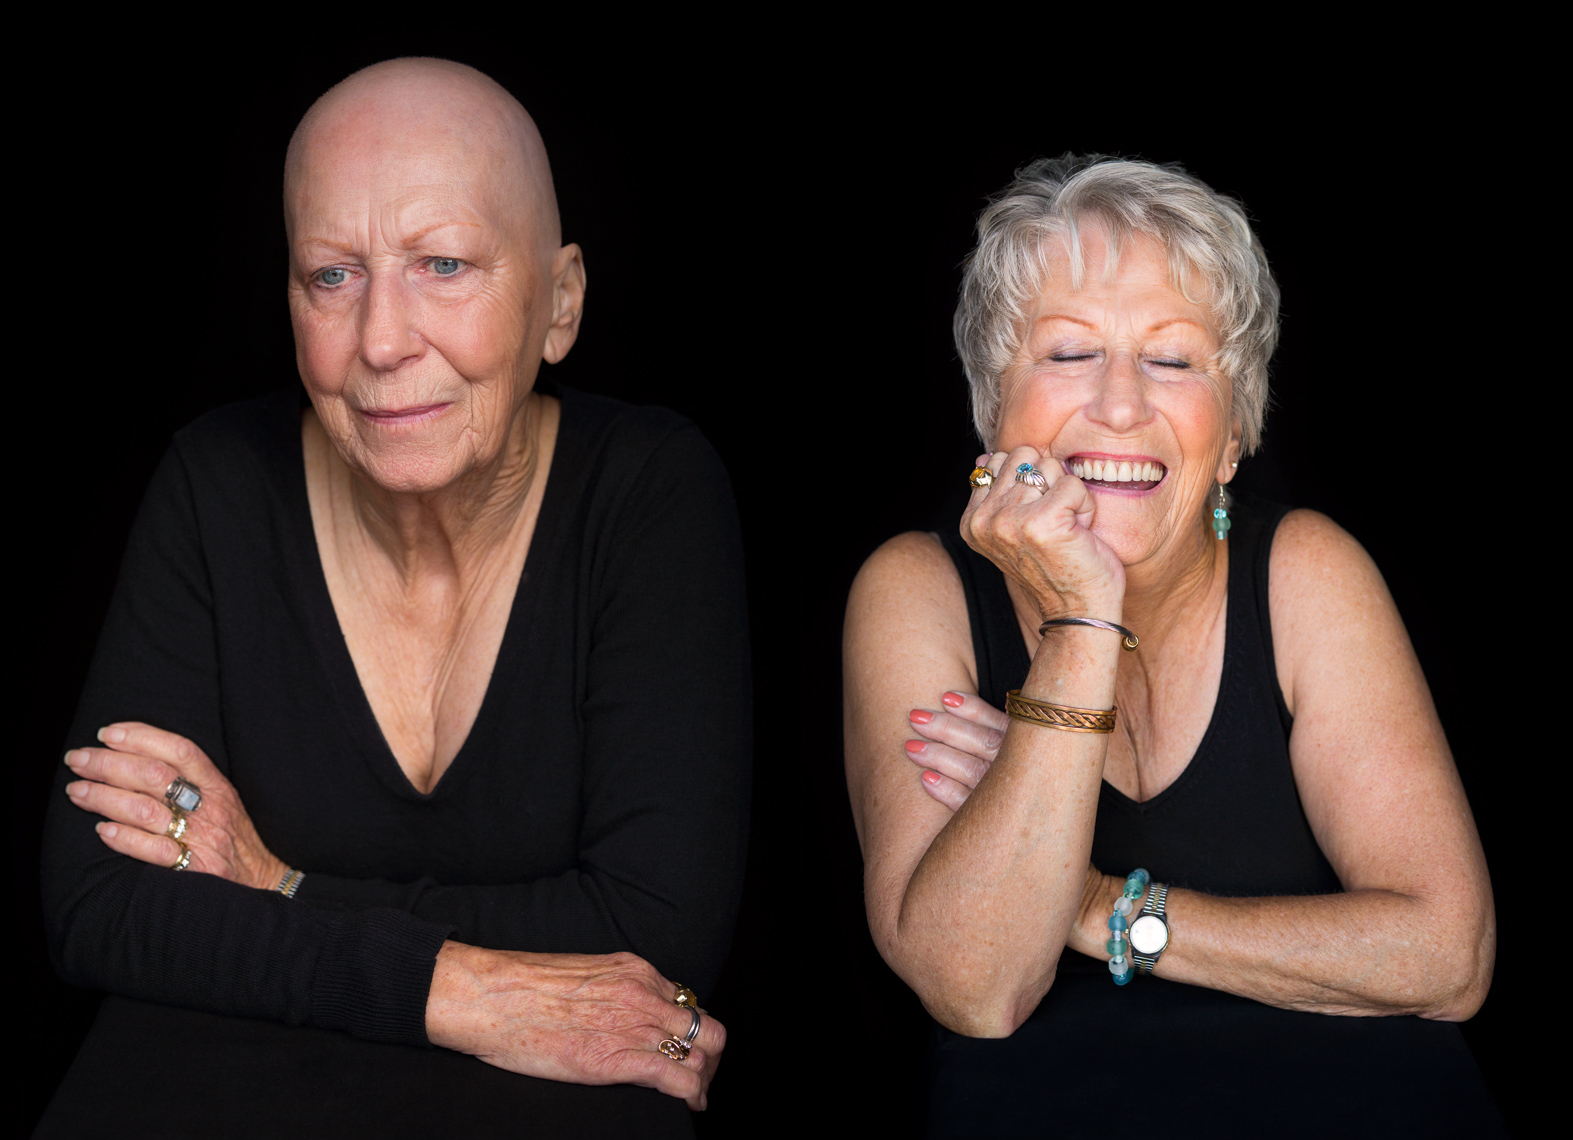 Facing Chemo Before and After - a photographic exhibit examing the effects of chemotherapy - by healthcare photographer Robert Houser